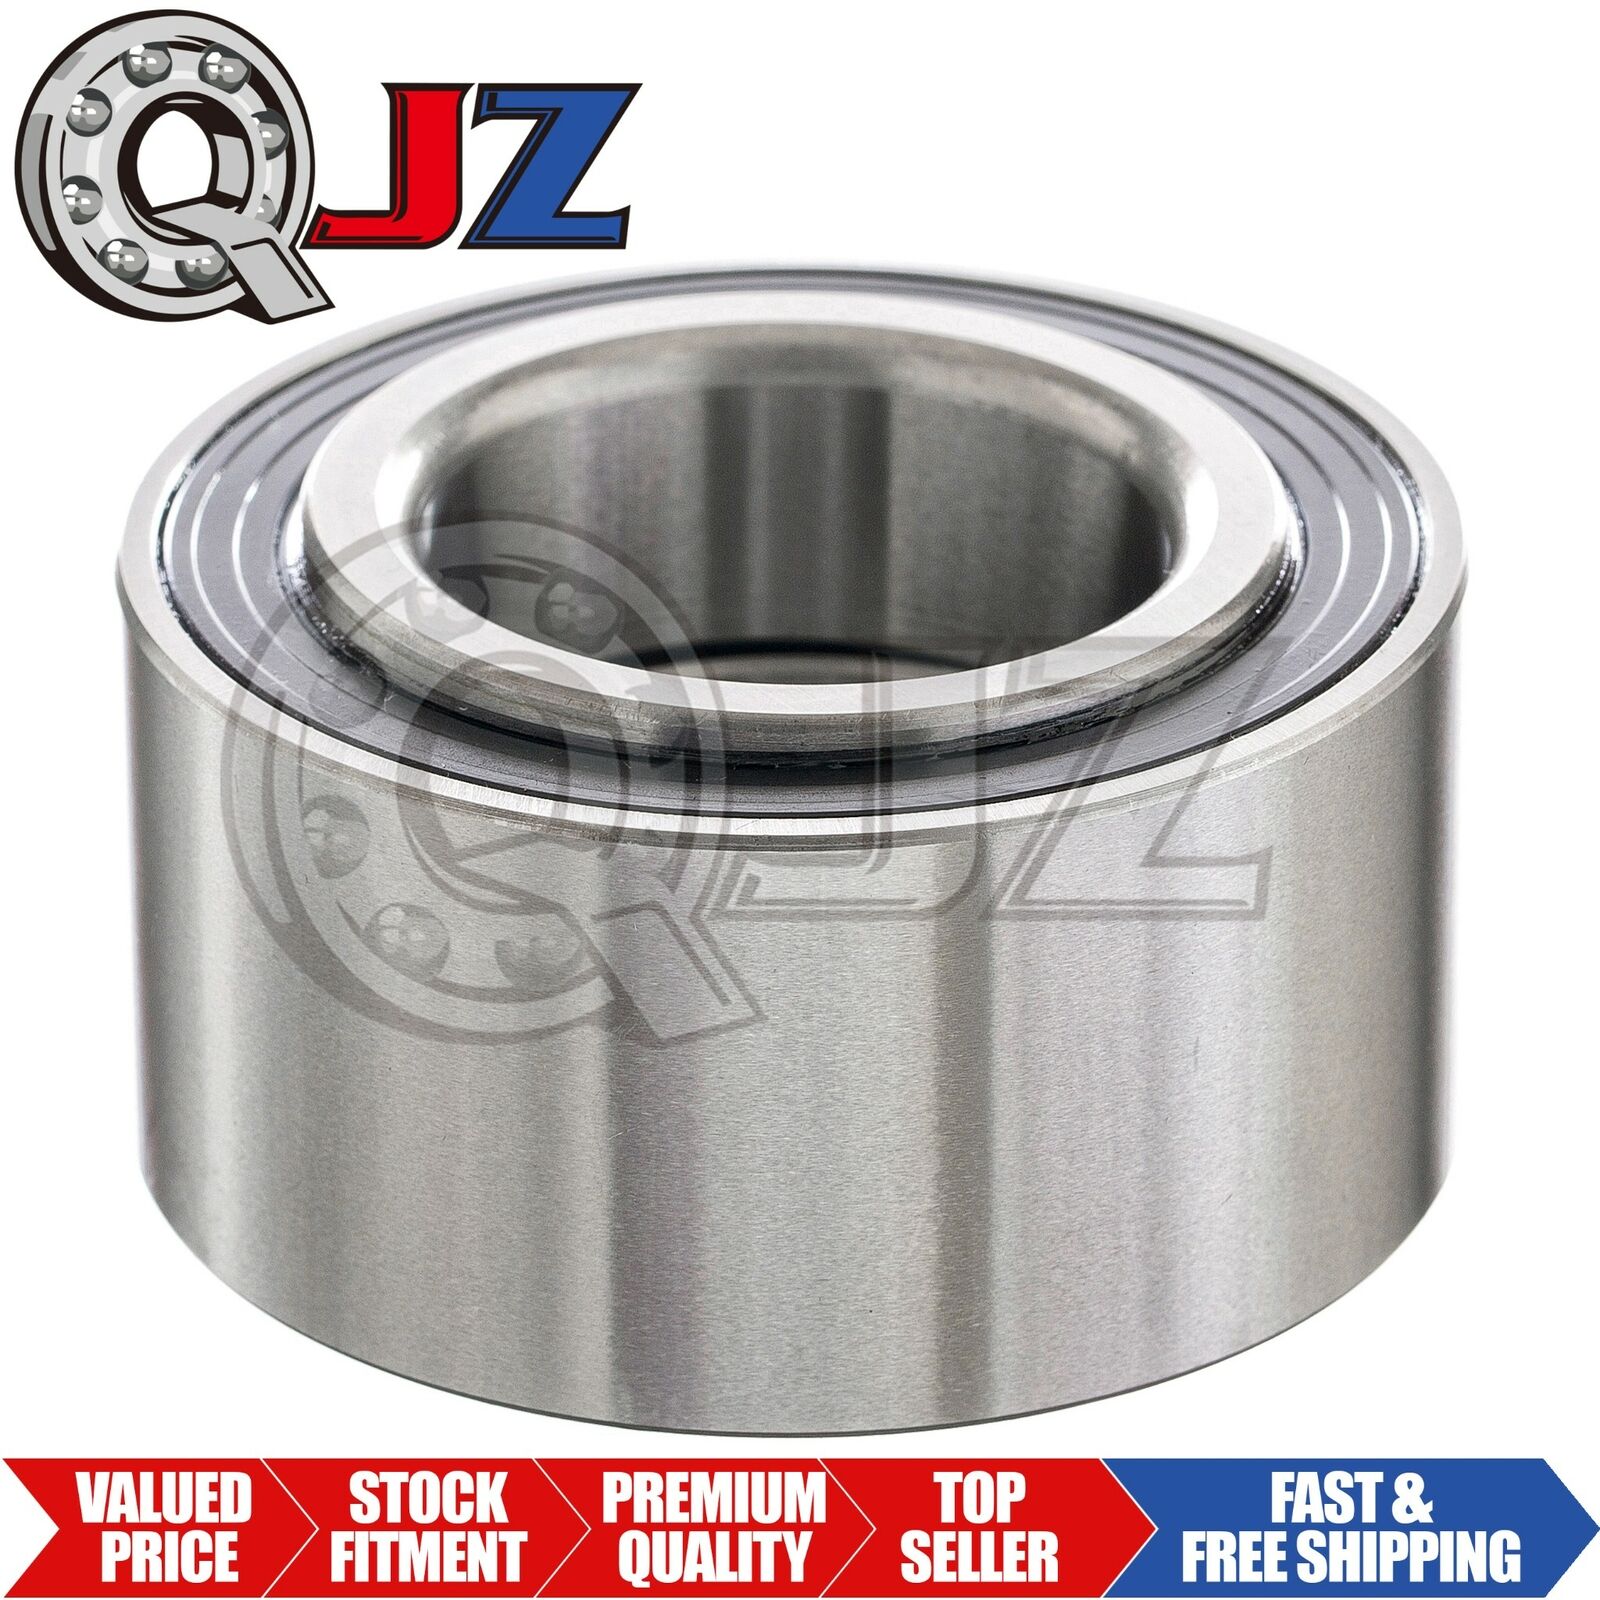 [FRONT(Qty.1)] Wheel Hub Bearing Replacement for 1984-1989 Plymouth Reliant FWD